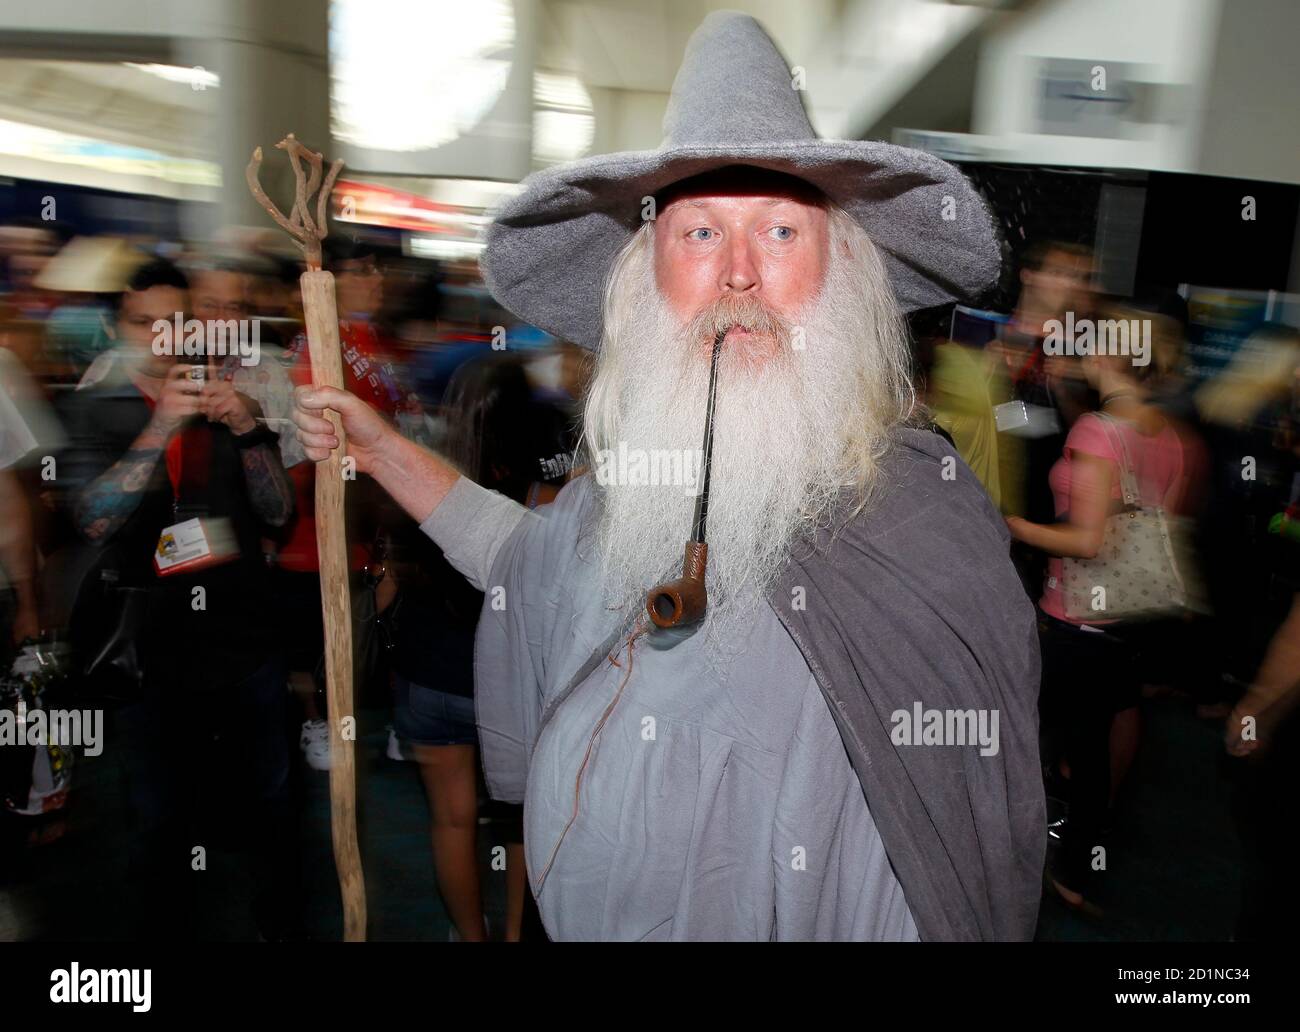 An attendee arrives for the third day of the pop culture convention Comic Con in San Diego, California July 24, 2010.    REUTERS/Mike Blake  (UNITED STATES - Tags: ENTERTAINMENT) Stock Photo